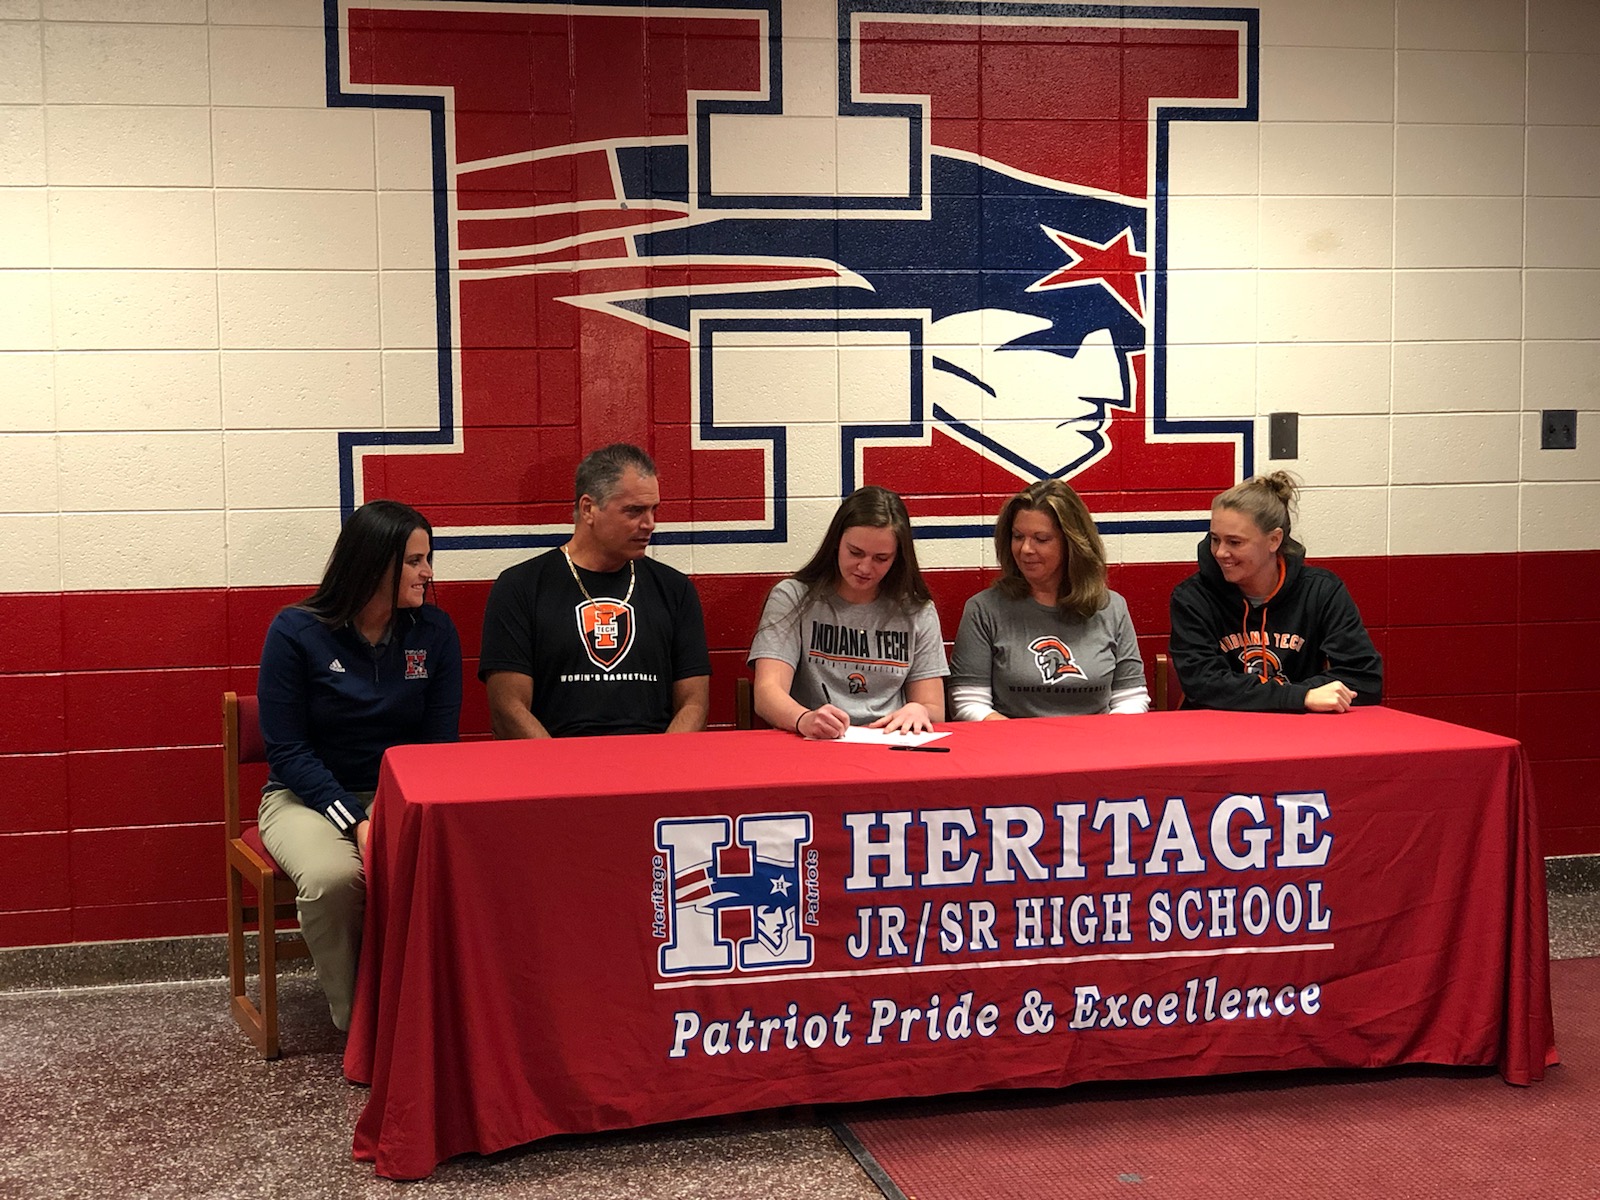 Heritage's Bree Dossen signs with Indiana Tech women's basketball